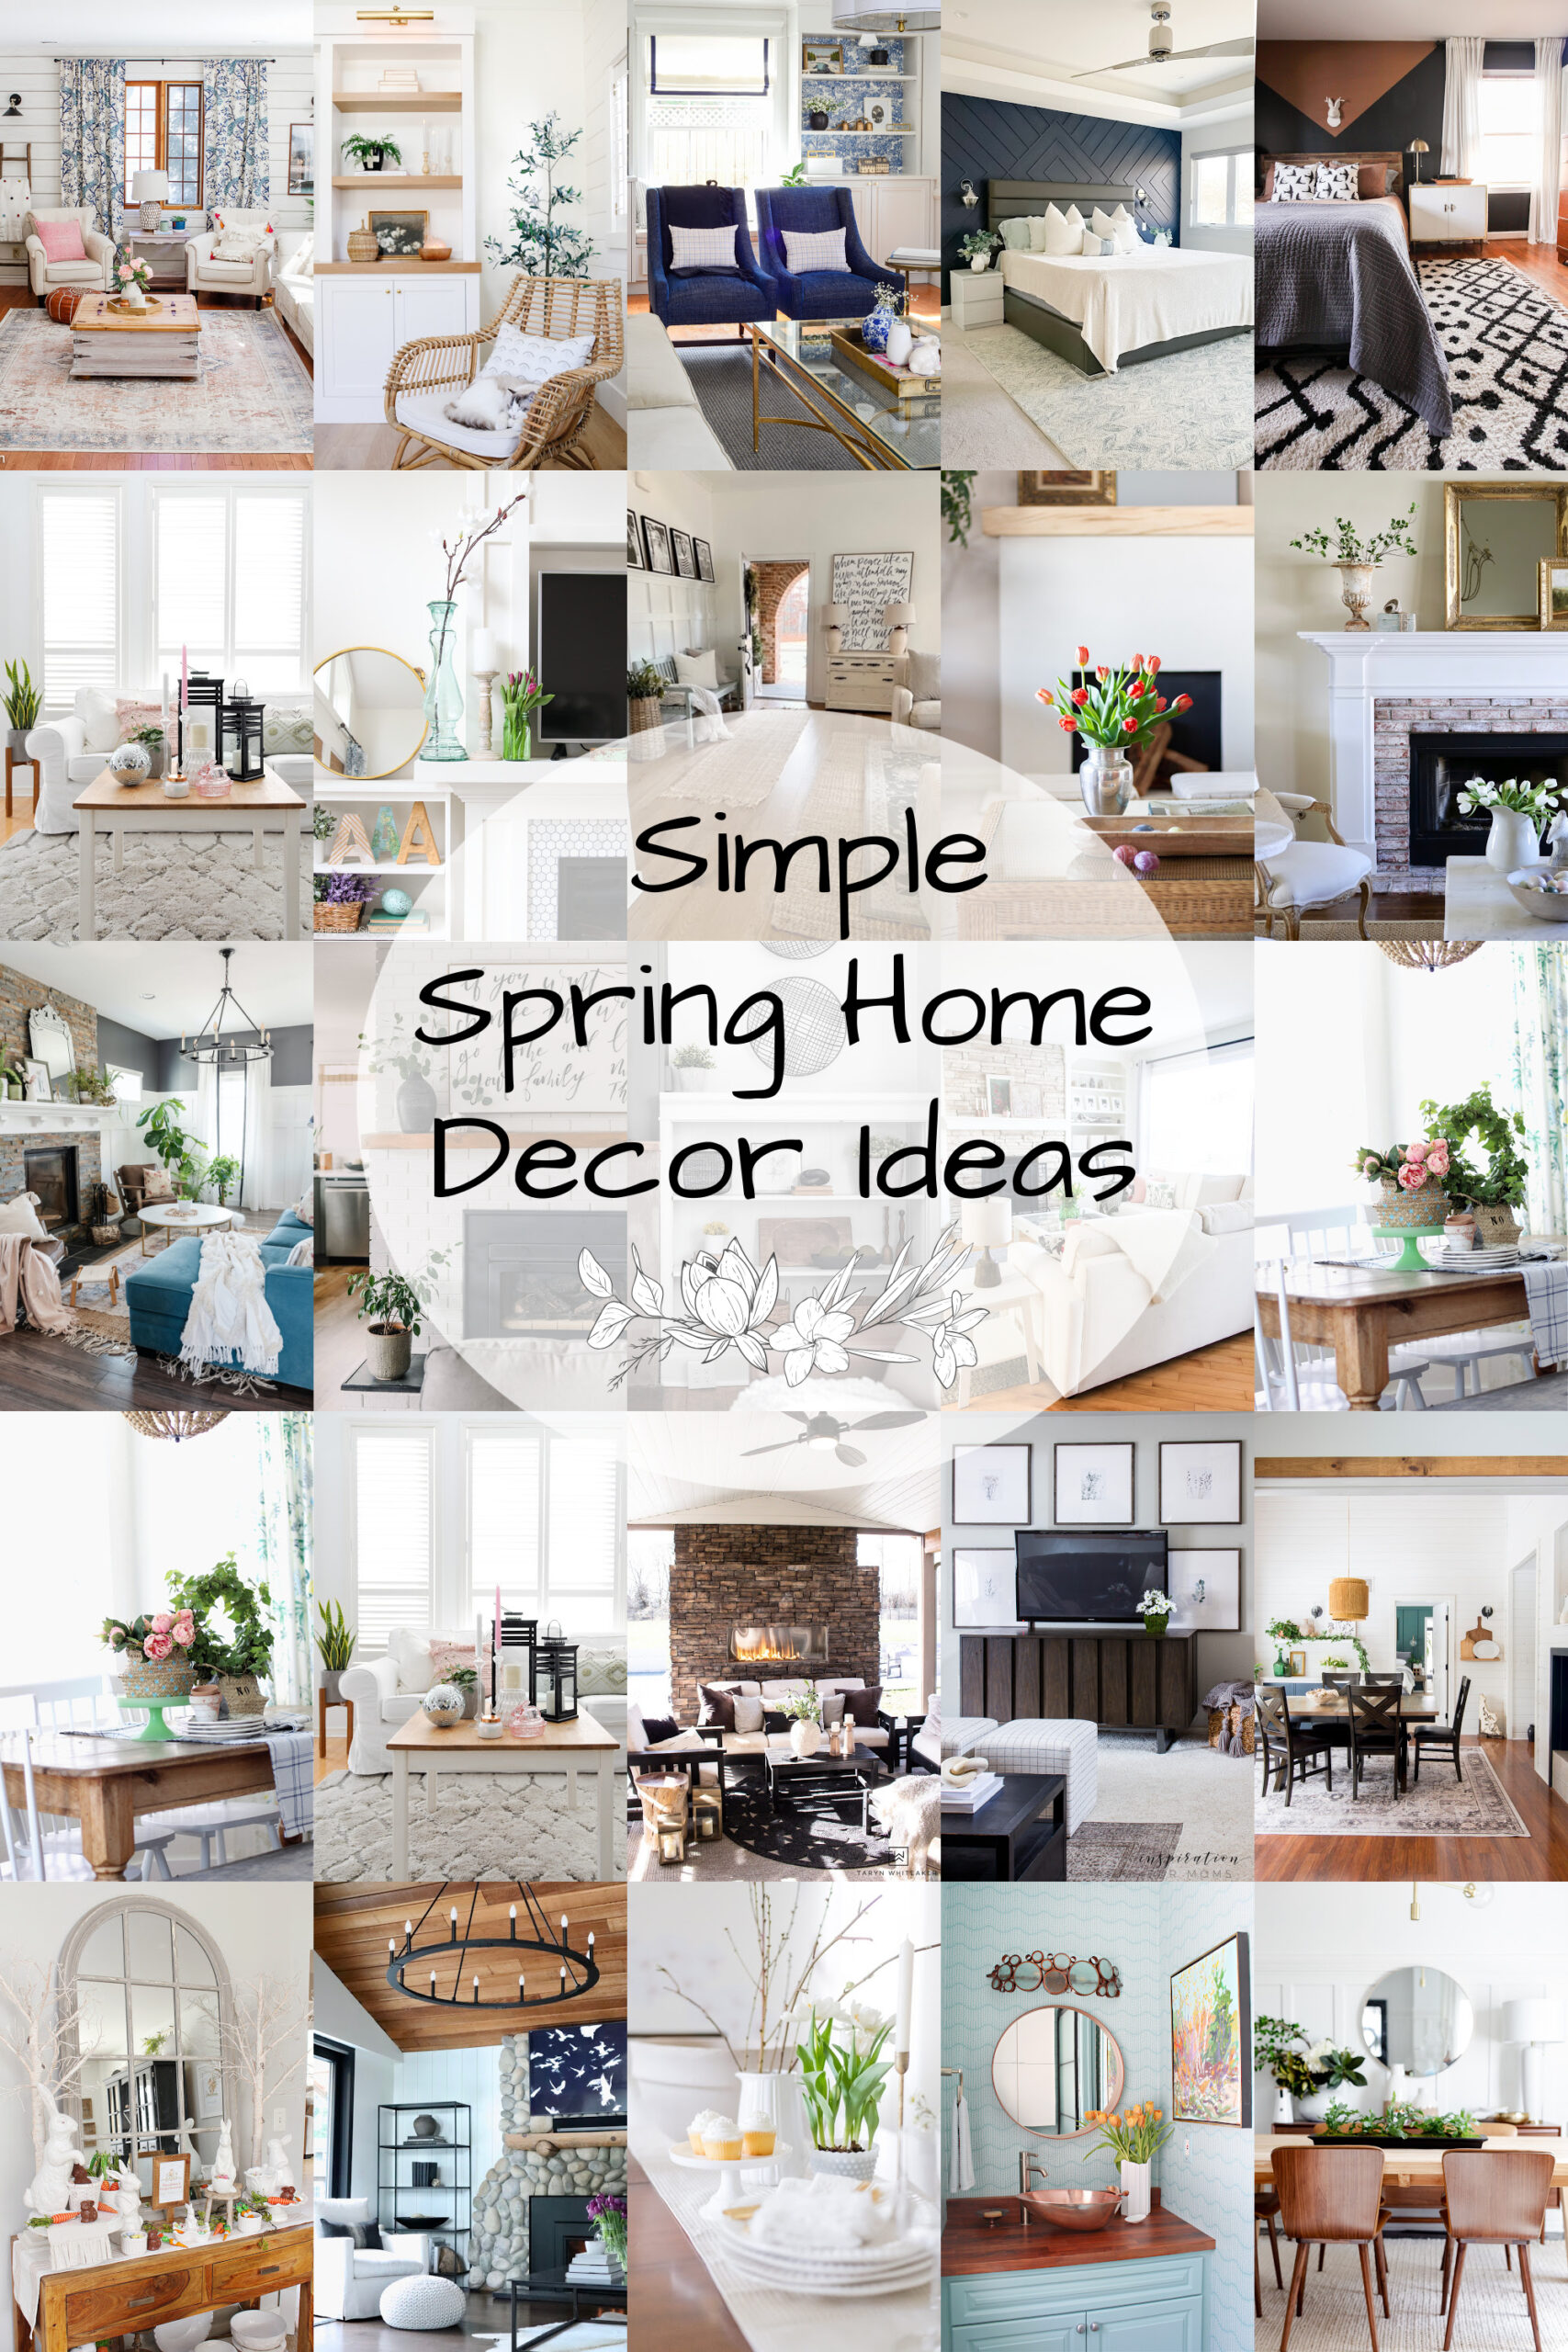 Spring Decorating Ideas on a Budget   The Happy Housie